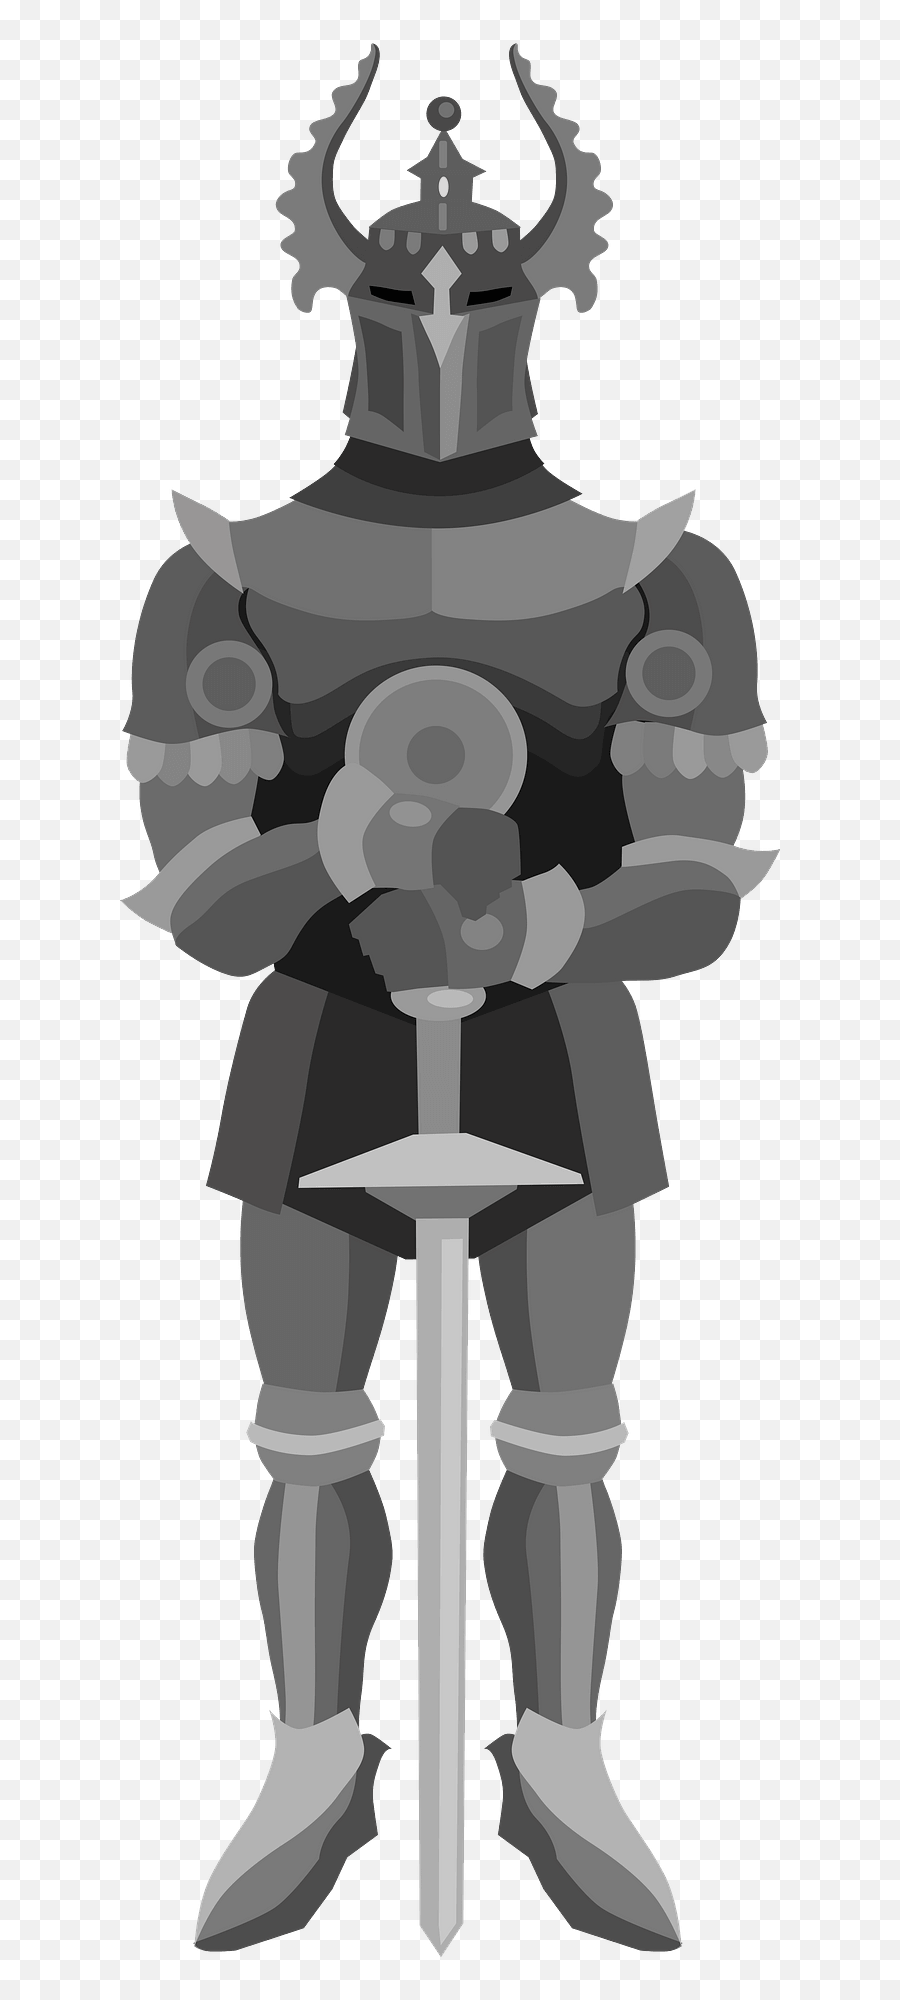 Knight On Horse Clipart For Free - Clipart World Emoji,Armor Clipart